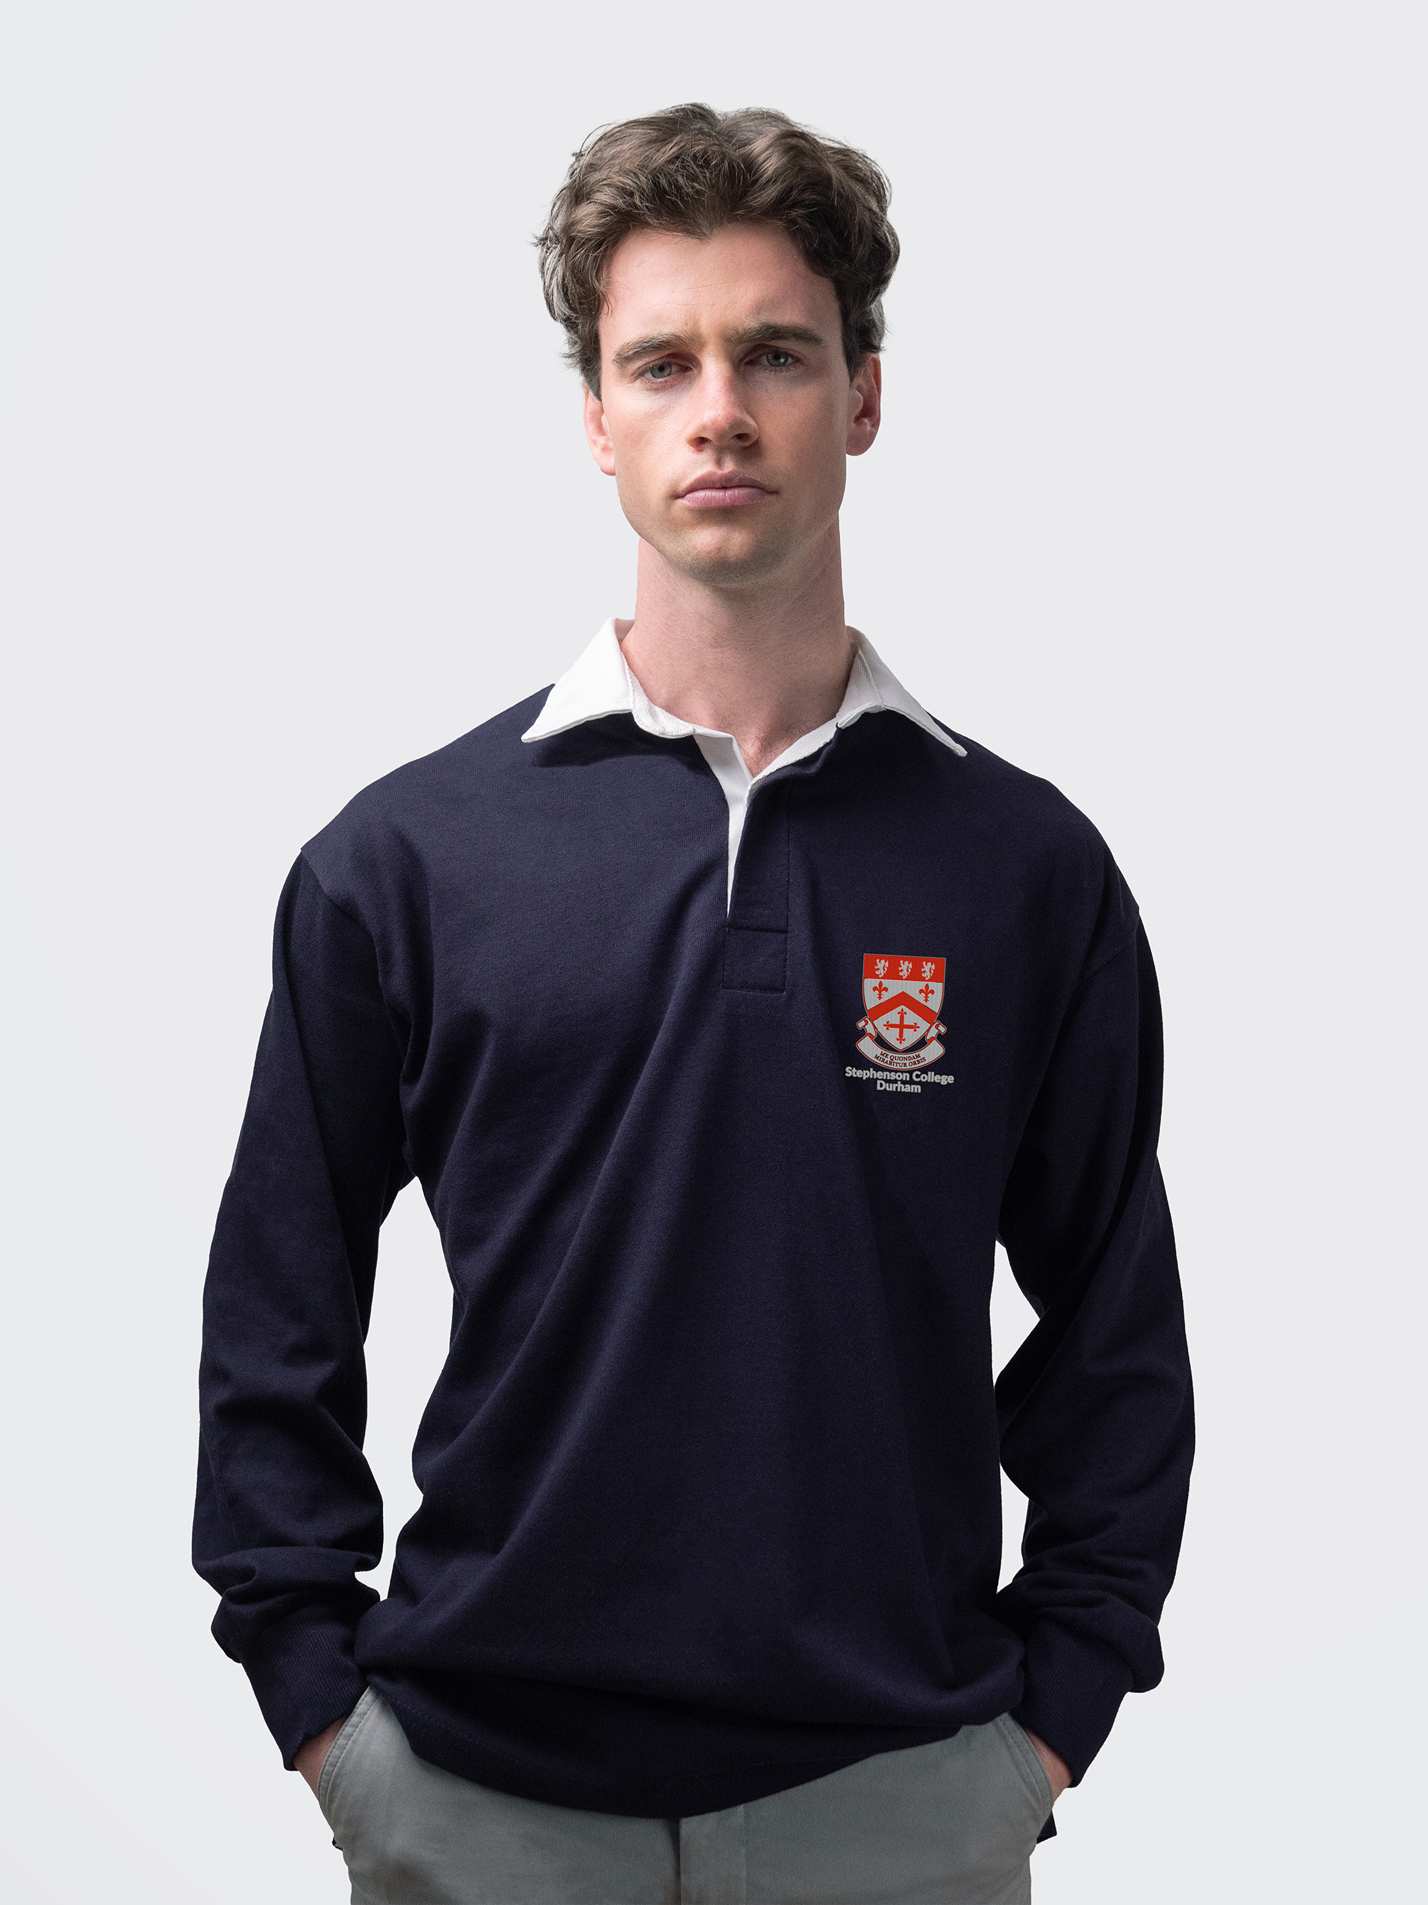 Stephenson student wearing an embroidered mens rugby shirt in navy